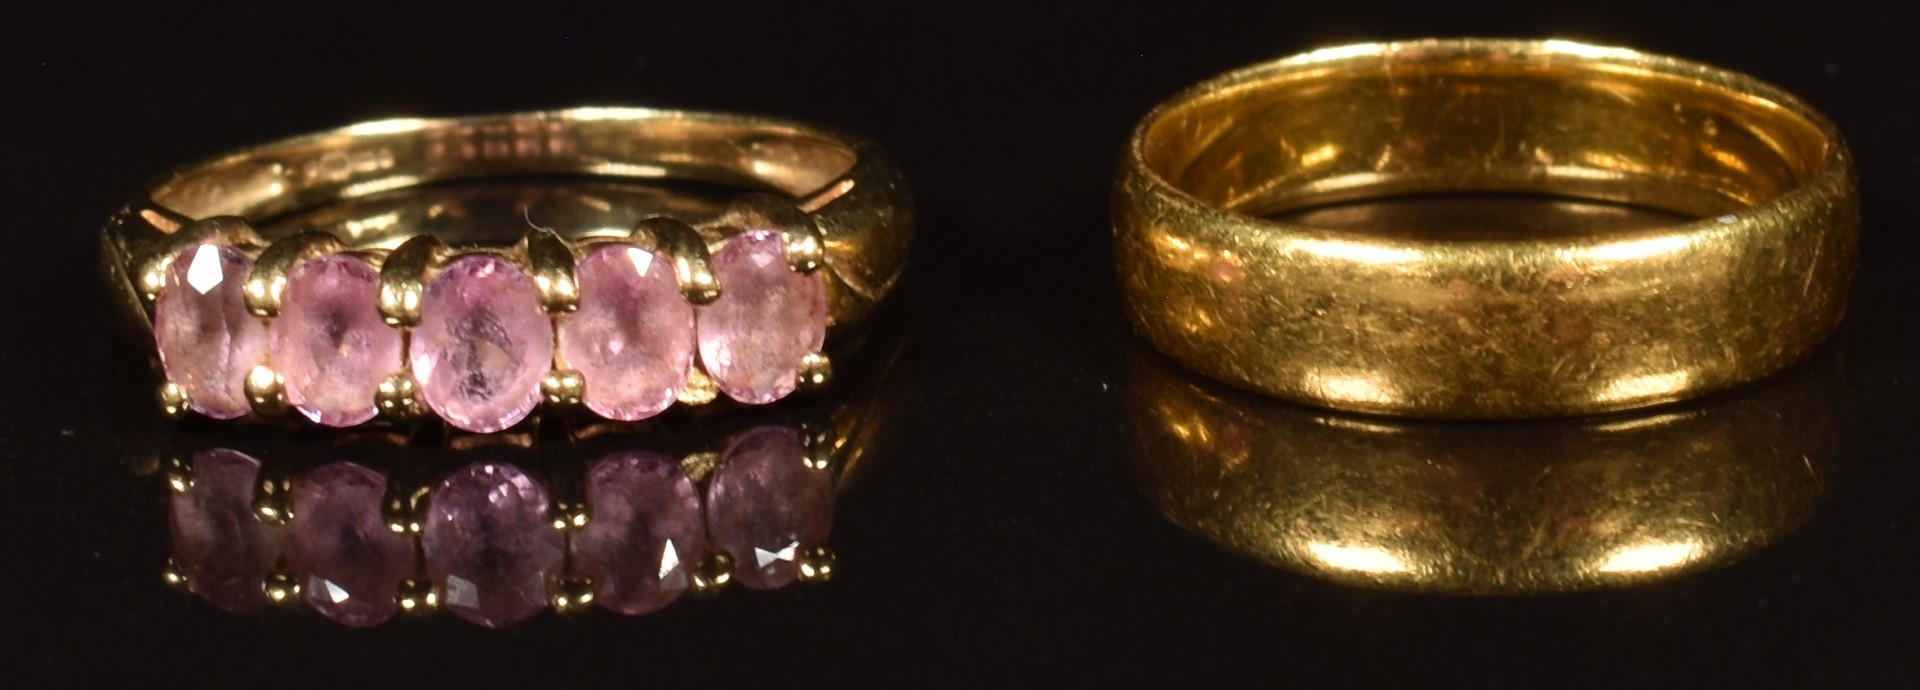 A 9ct gold ring set with five oval cut pink sapphires (2.1g) and a 22ct gold wedding band (3.5g)